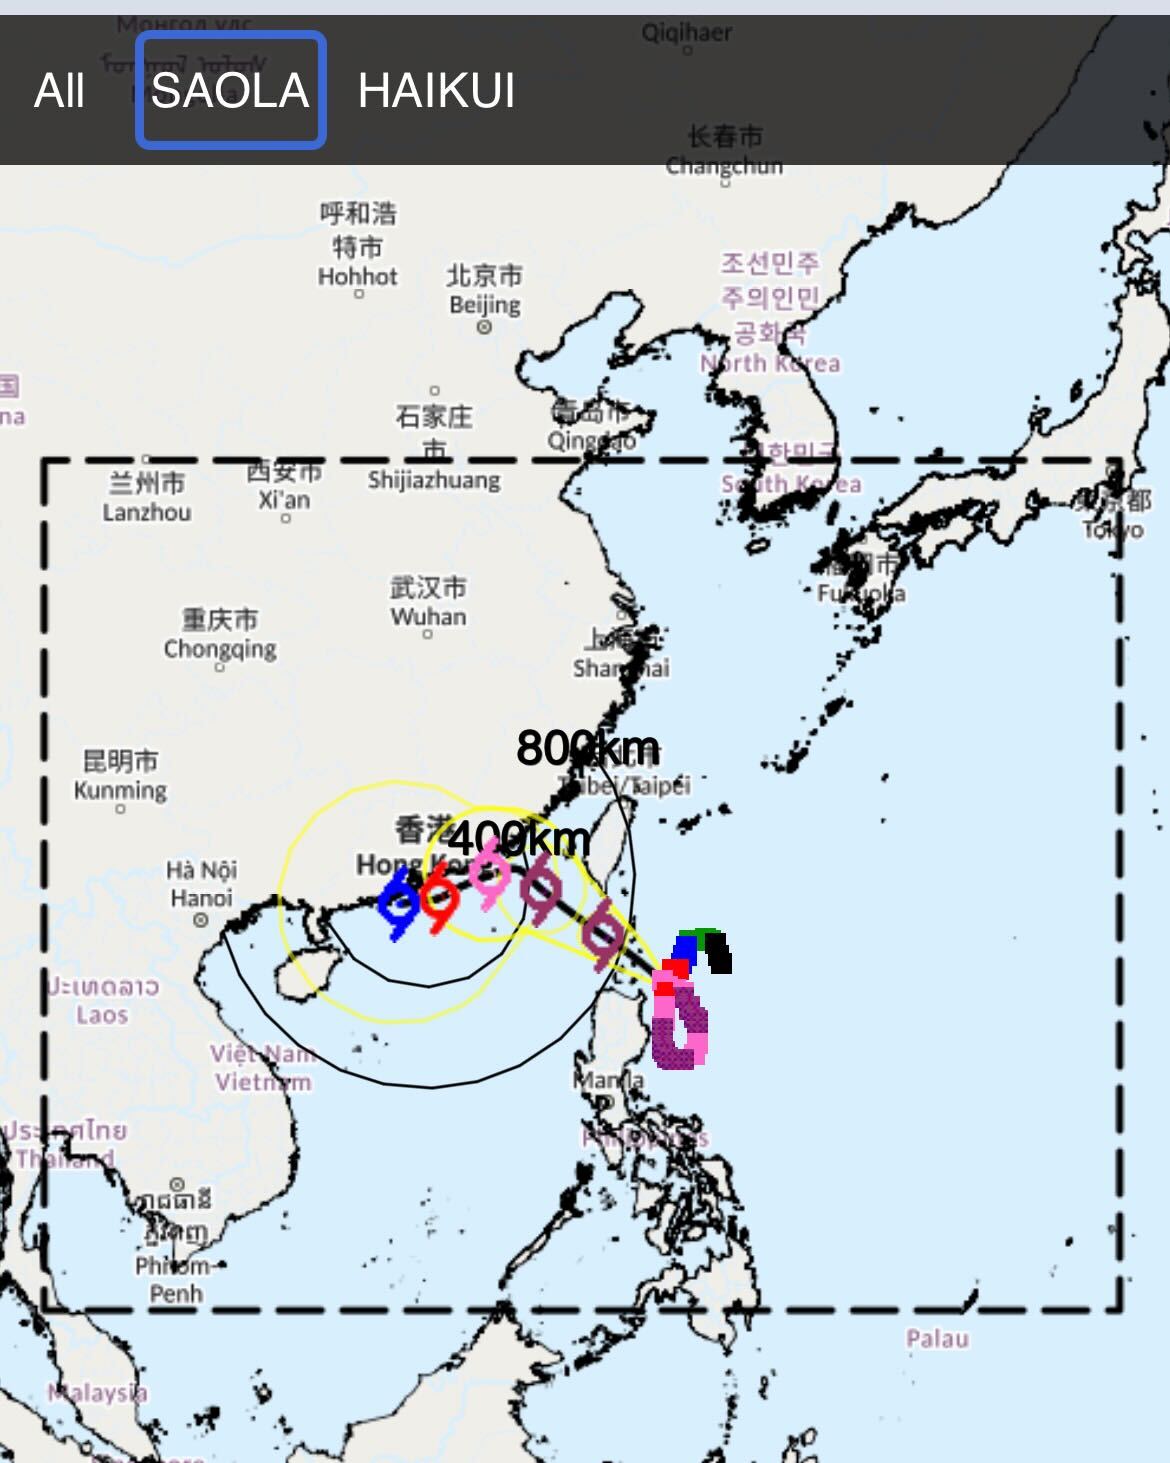 A screenshot from the Hong Kong Observatory showing the track of Tropical Cyclone Saola.